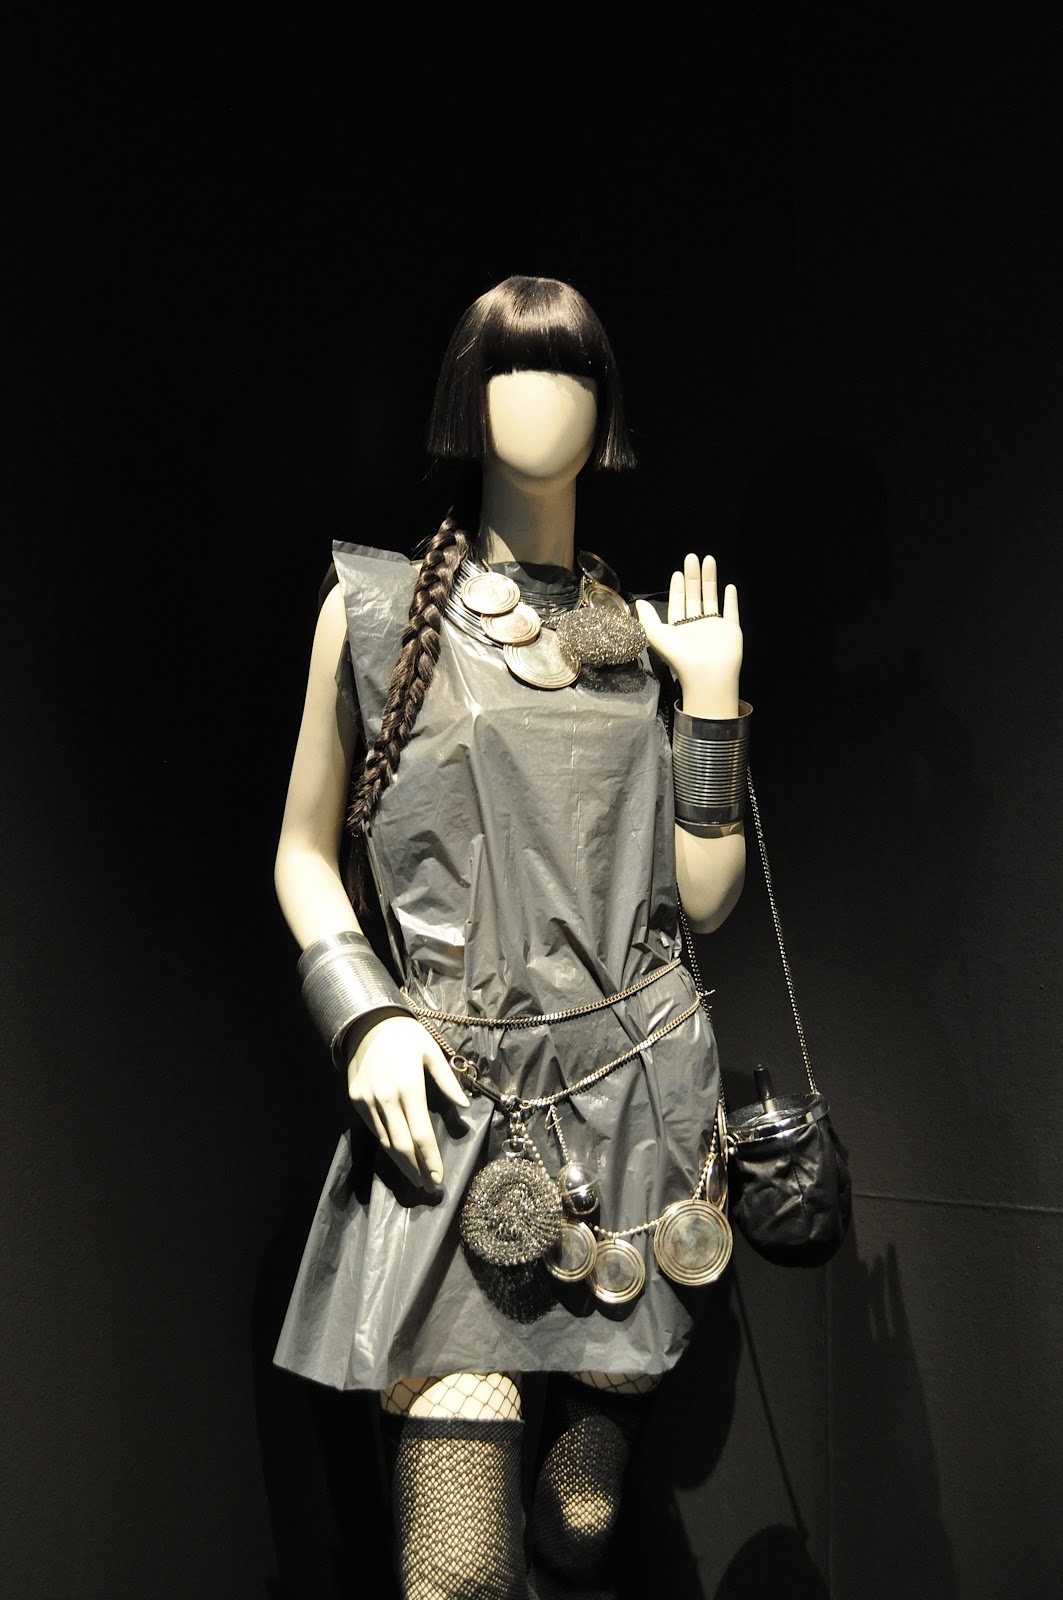 BRANKOPOPOVICBLOG: The Fashion World of Jean Paul Gaultier at Kunsthal